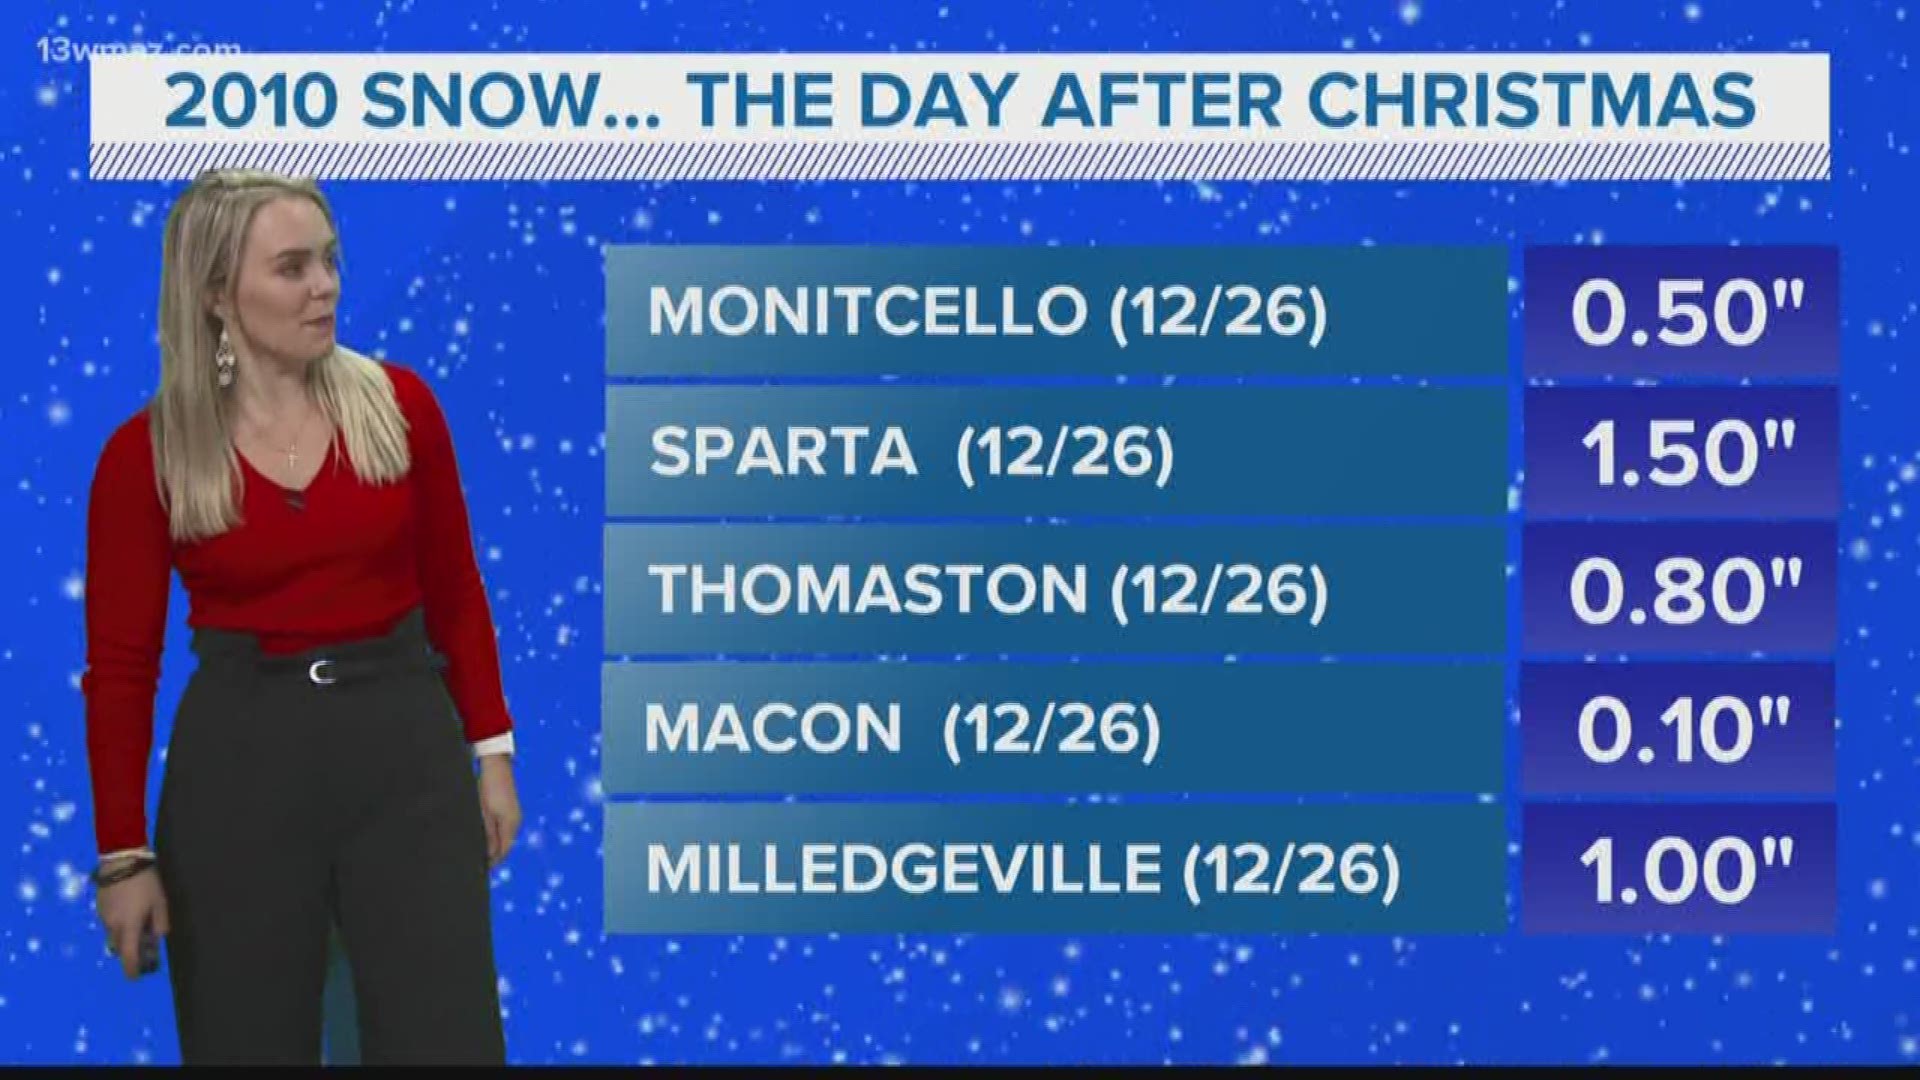 Snow never seems to be present for Central Georgia on Christmas in recent years. But have we ever had a white Christmas on record?